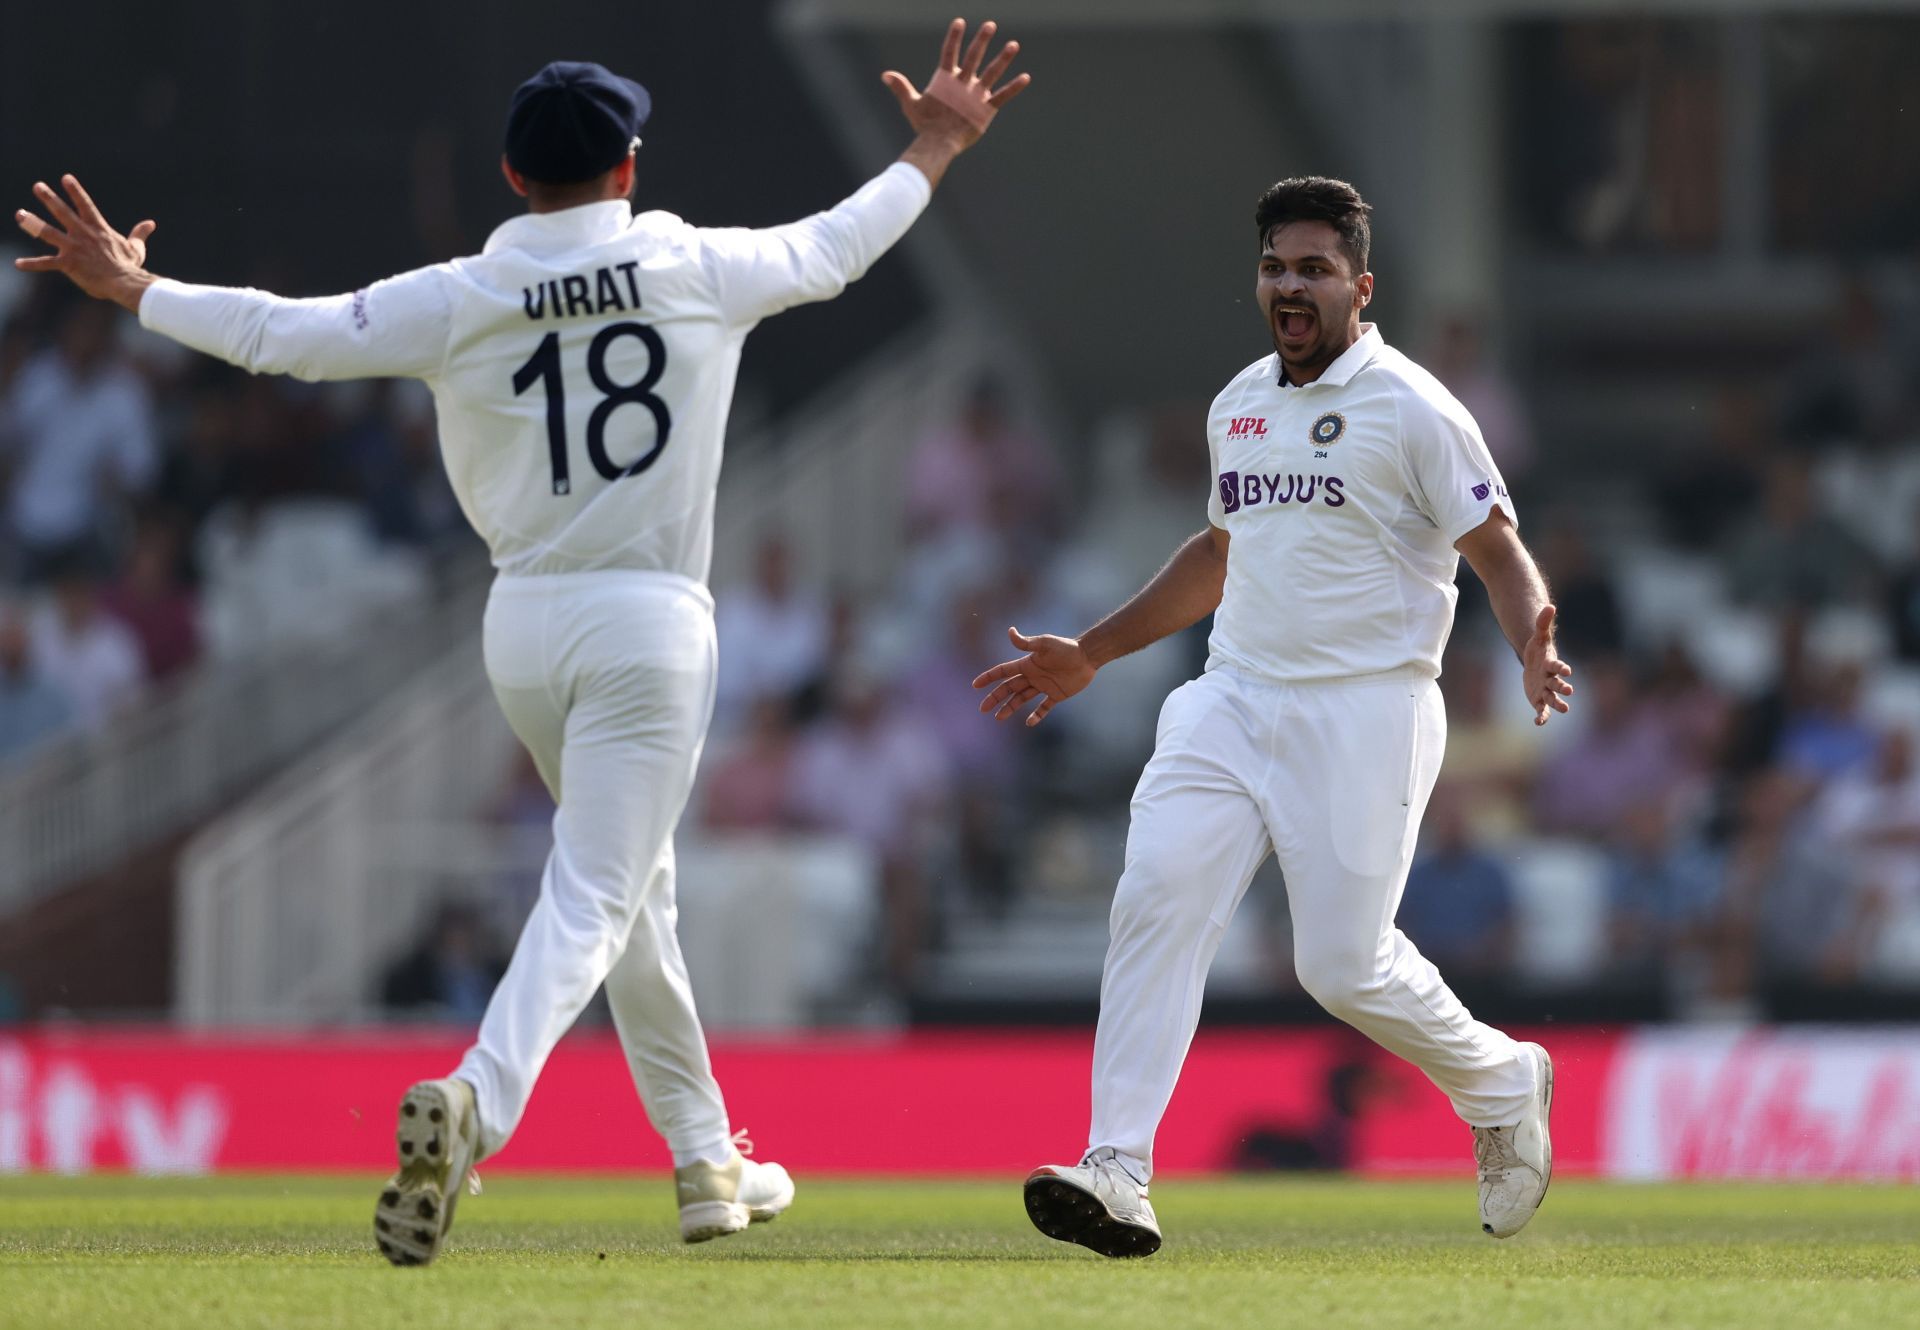 Shardul Thakur had a poor outing against England at Edgbaston.